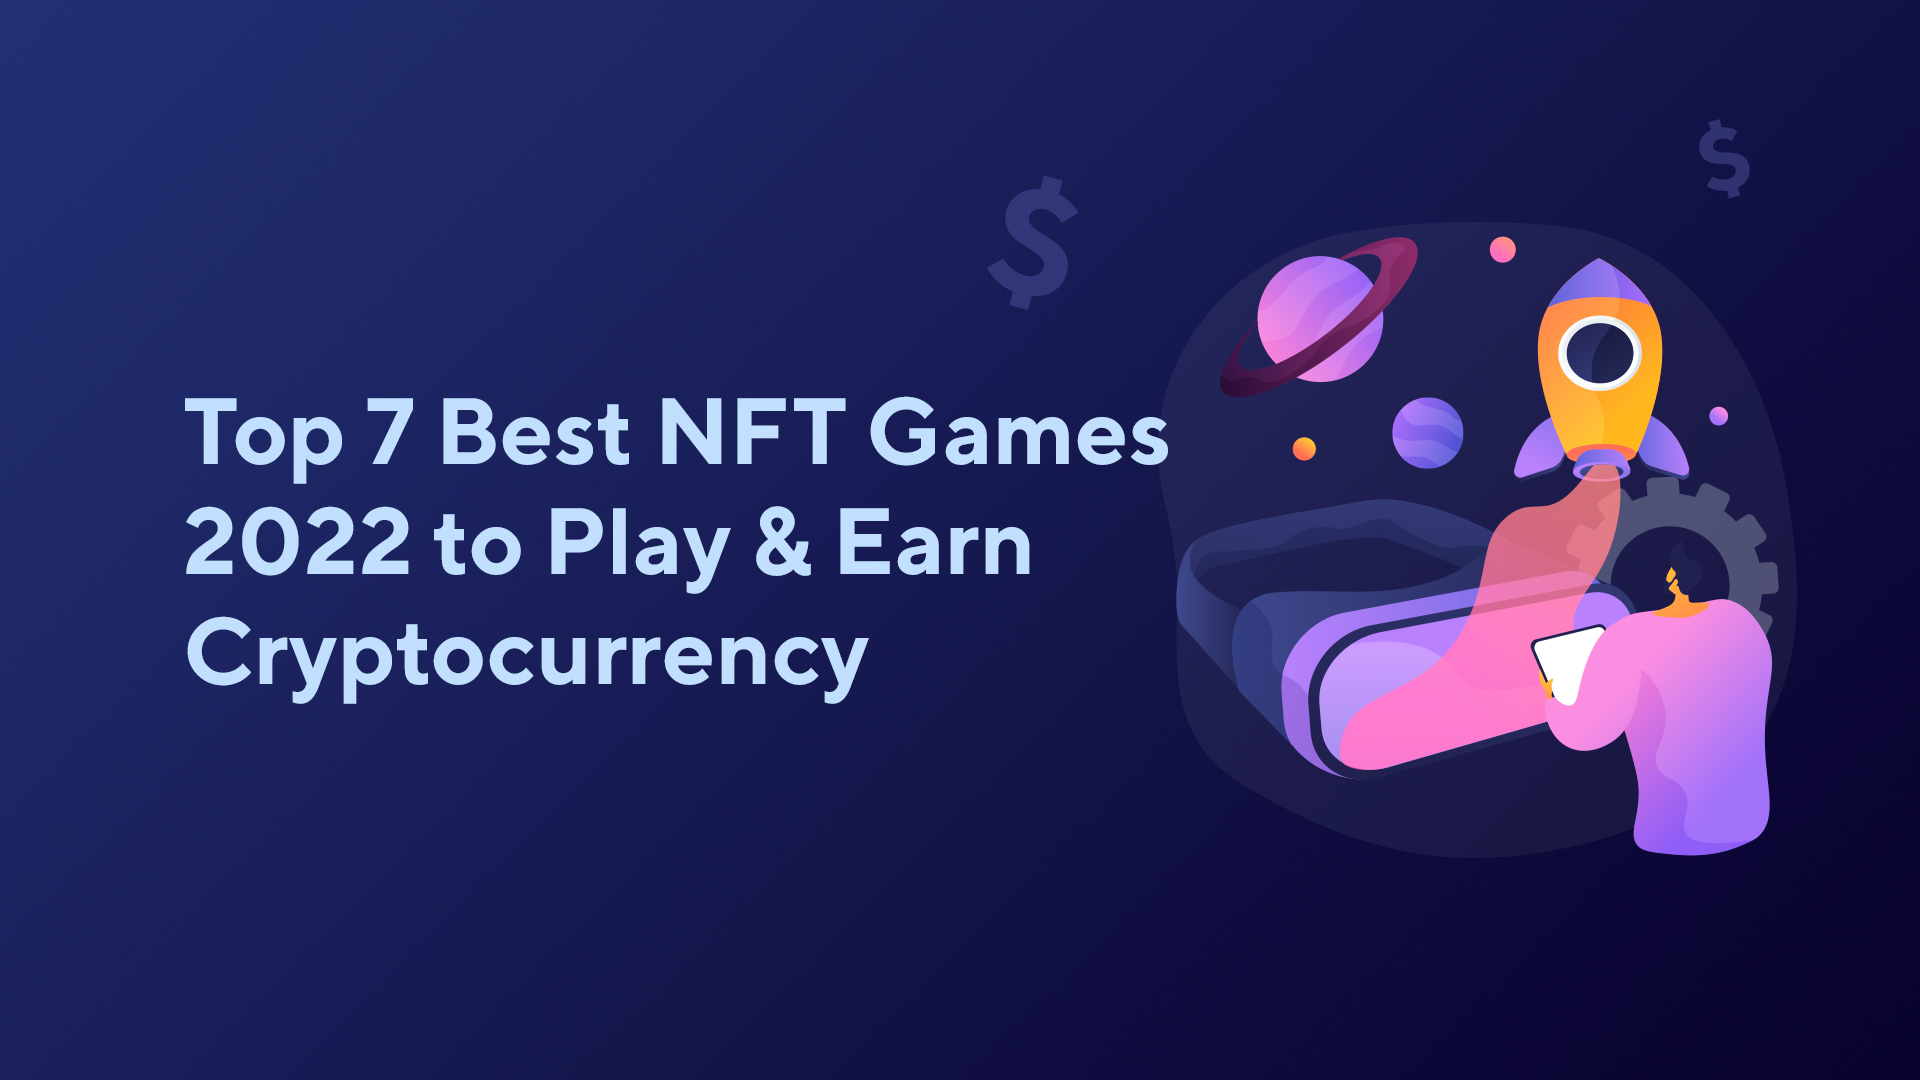 Top 7 Best NFT Games 2022 to Play & Earn Cryptocurrency